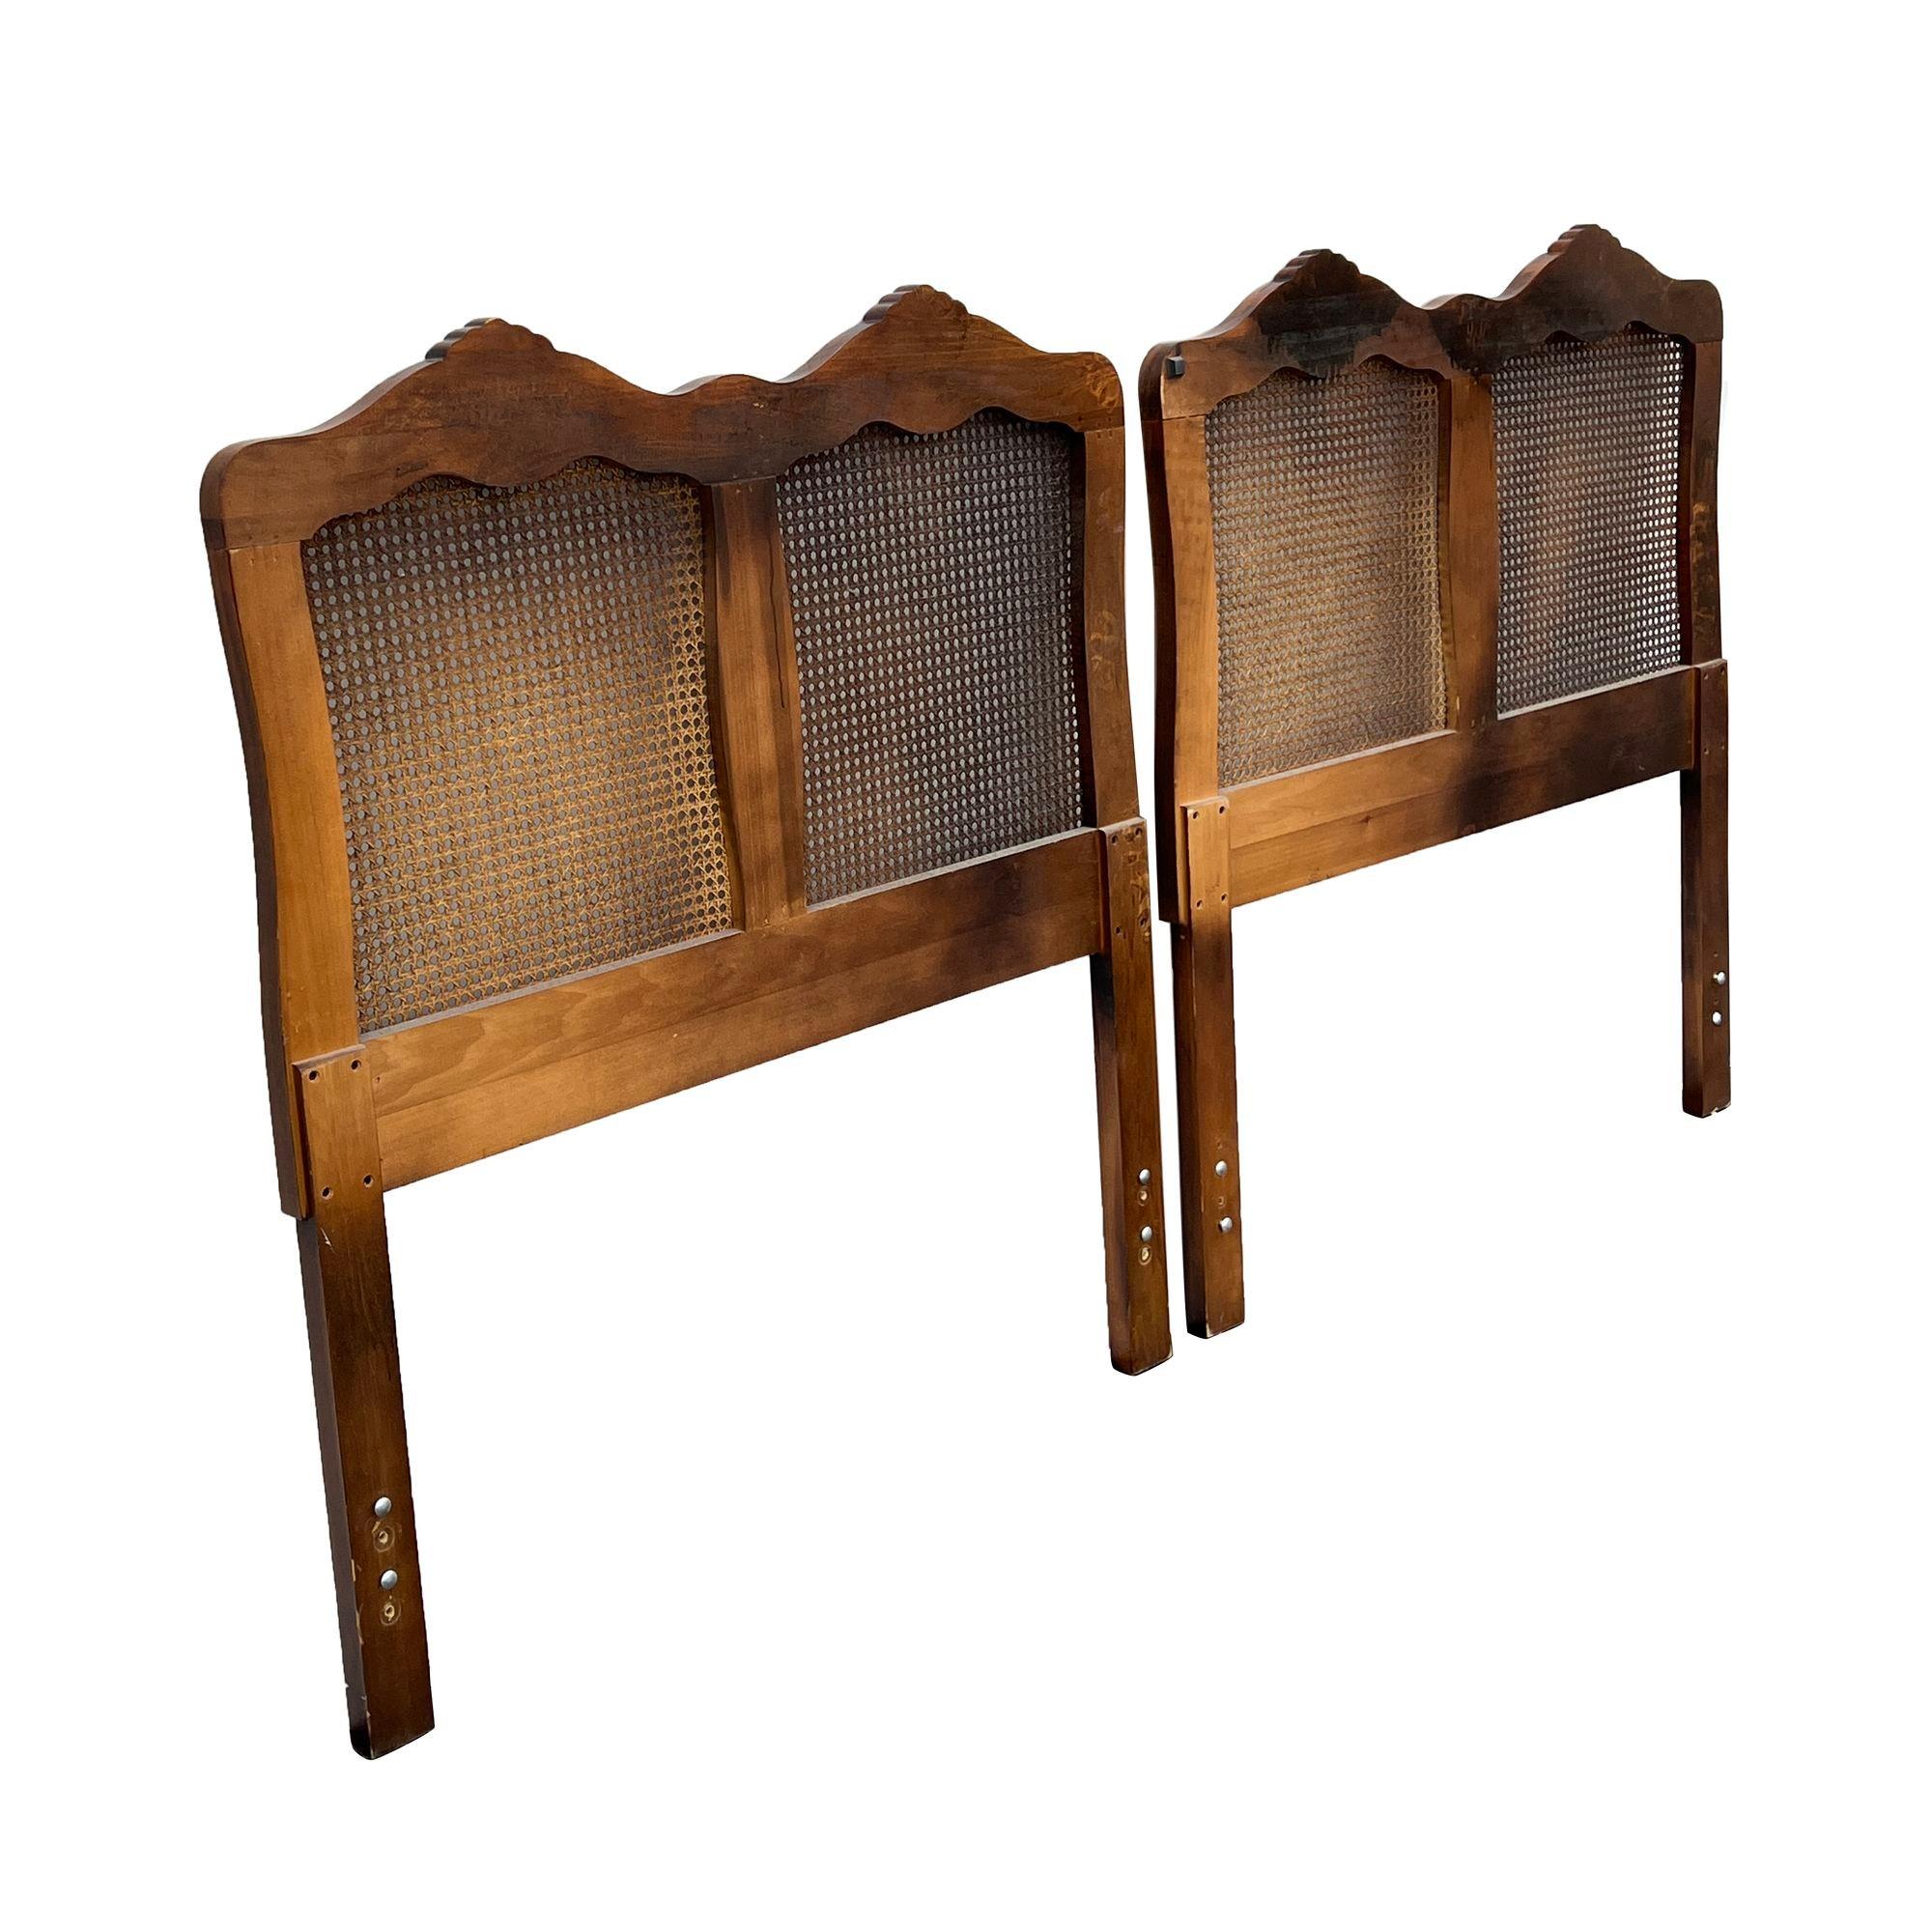 Cane French Provincial Twin Headboards in Walnut and Caning attr. Henredon, pair For Sale